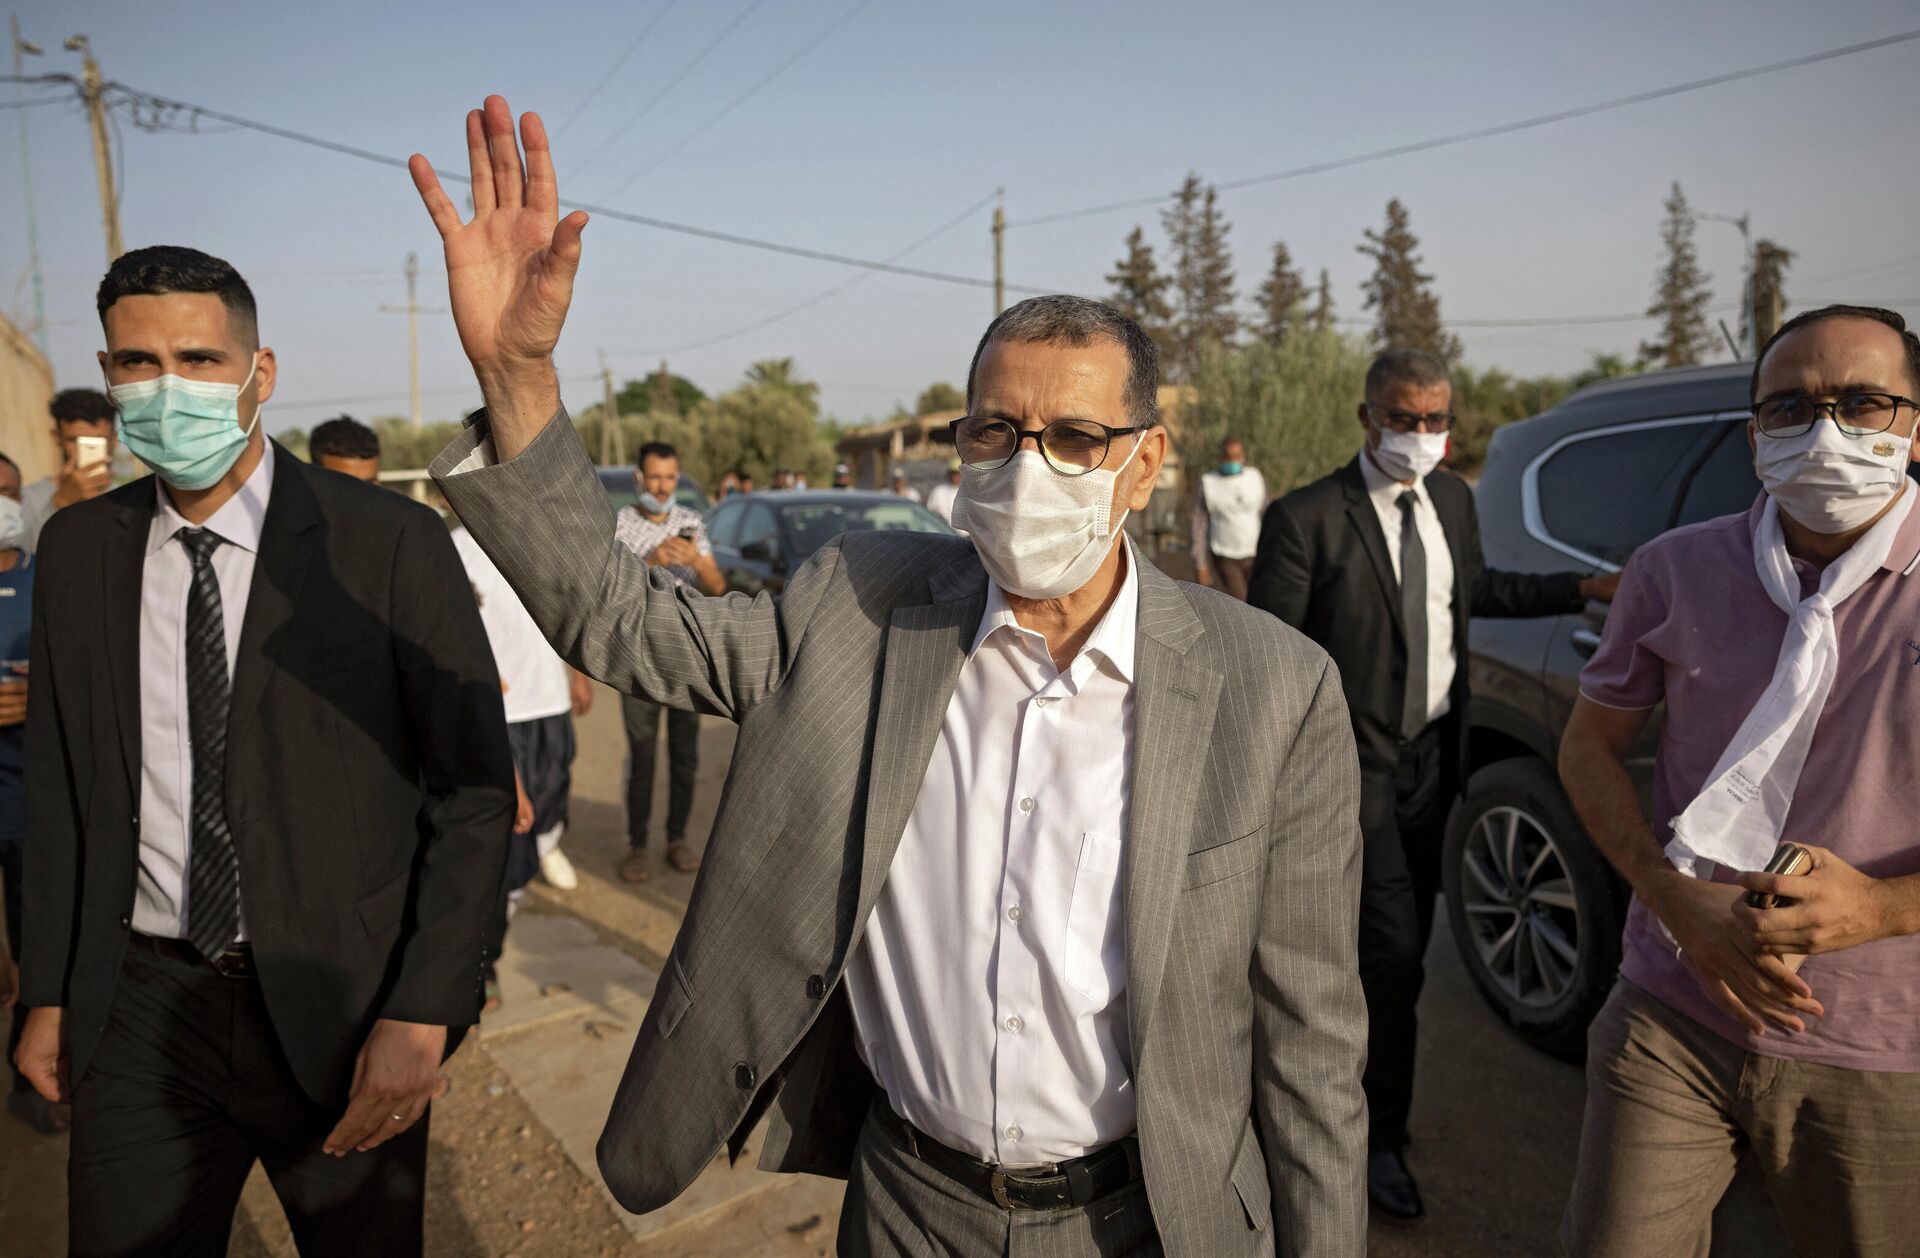 Saad-Eddine El Othmani , Morocco's Prime Minister and President of the Islamist Justice and Development Party (PJD), greets people during a campaign meeting in Sidi Slimane, some 120 kms from Rabat, on August 27, 2021, ahead of the upcoming elections. - Sputnik International, 1920, 10.09.2021